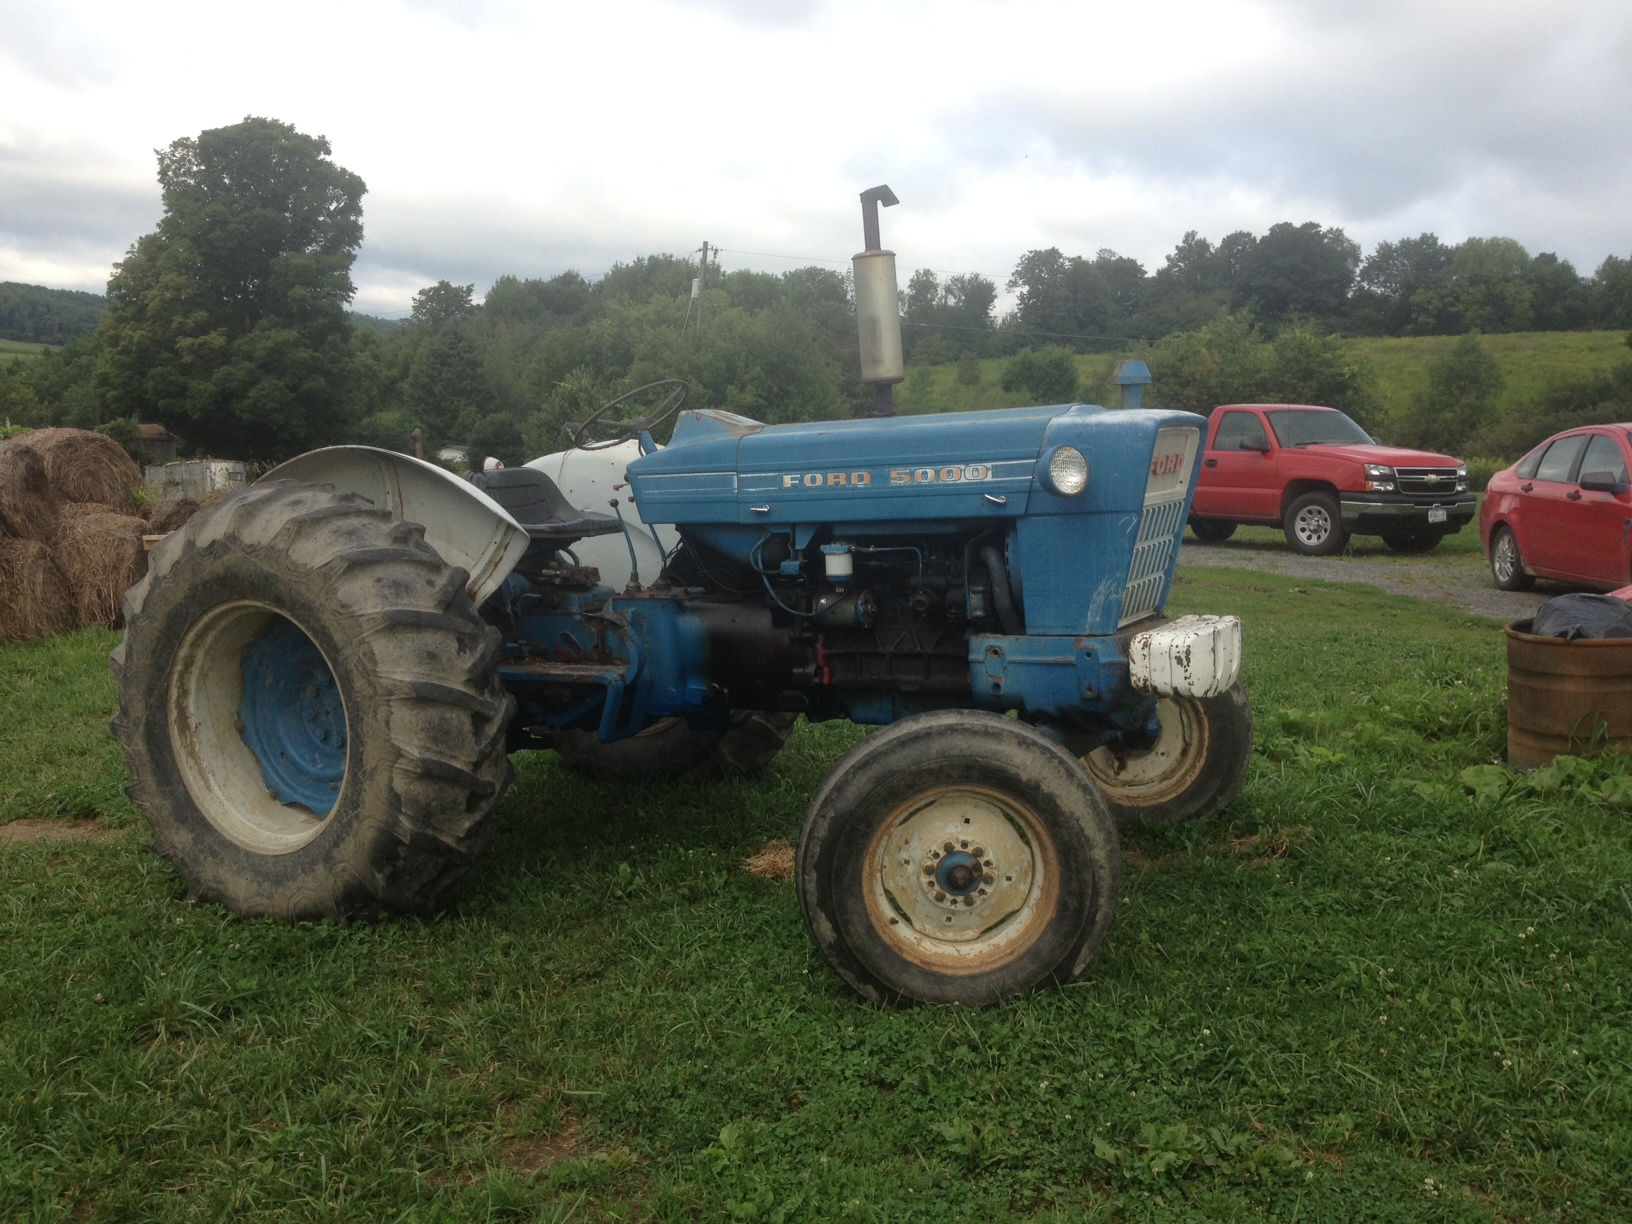 Selecting a Tractor for the Small Farm | Cornell Small Farms Program